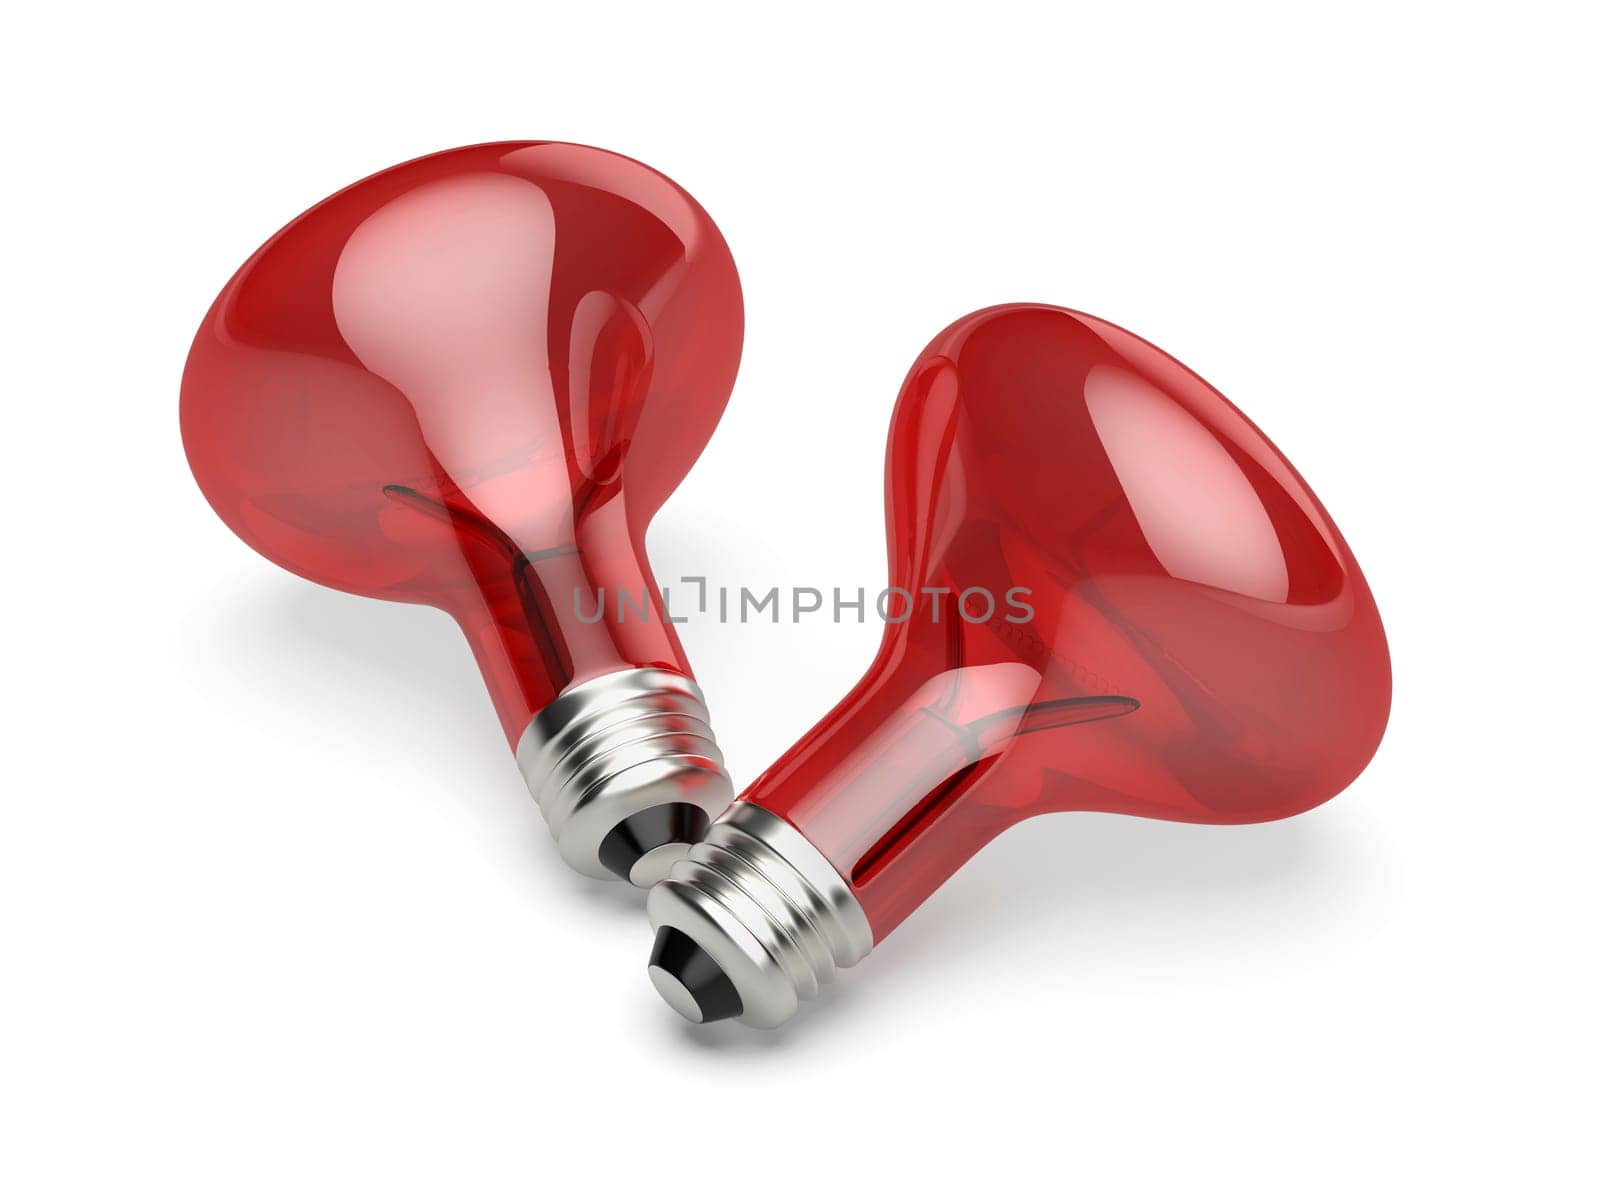 Two Infrared light bulbs on white background